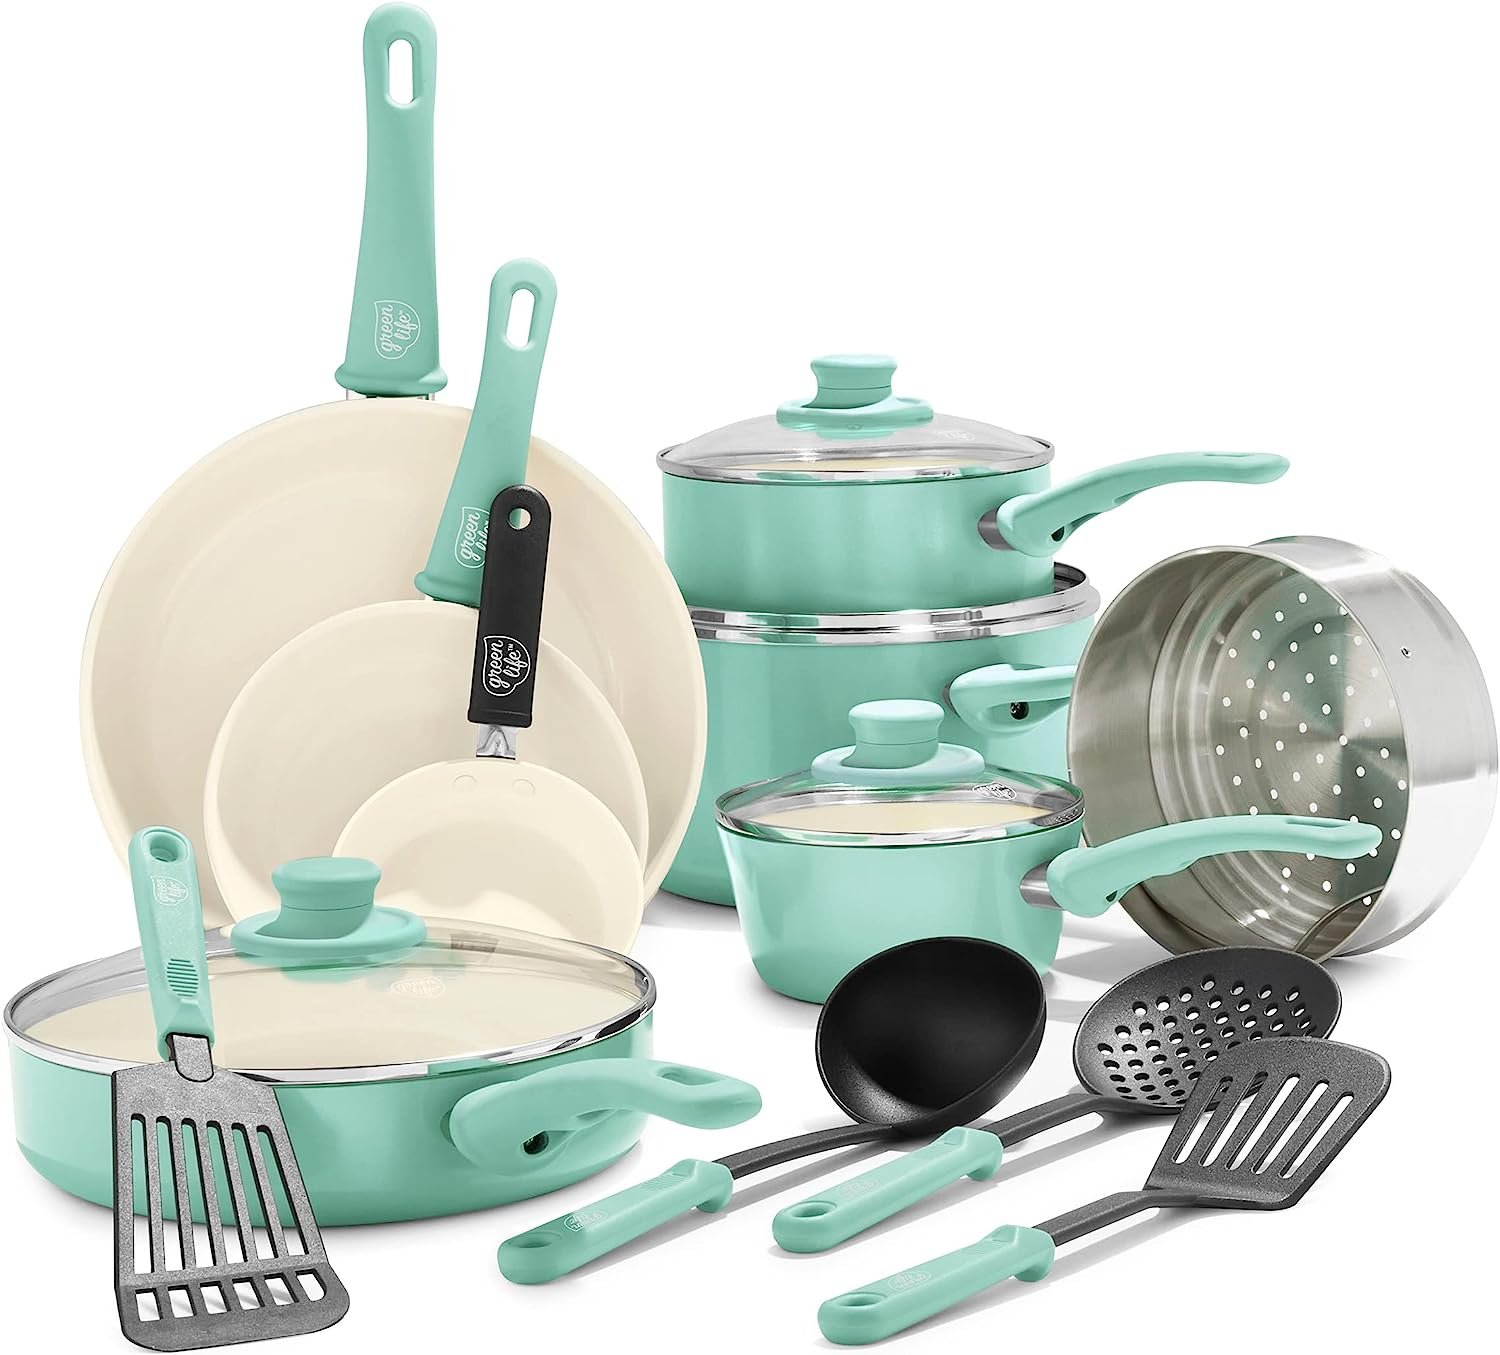 8 Best Non-Toxic Cookware Sets to Keep Your Food and Yourself Safe